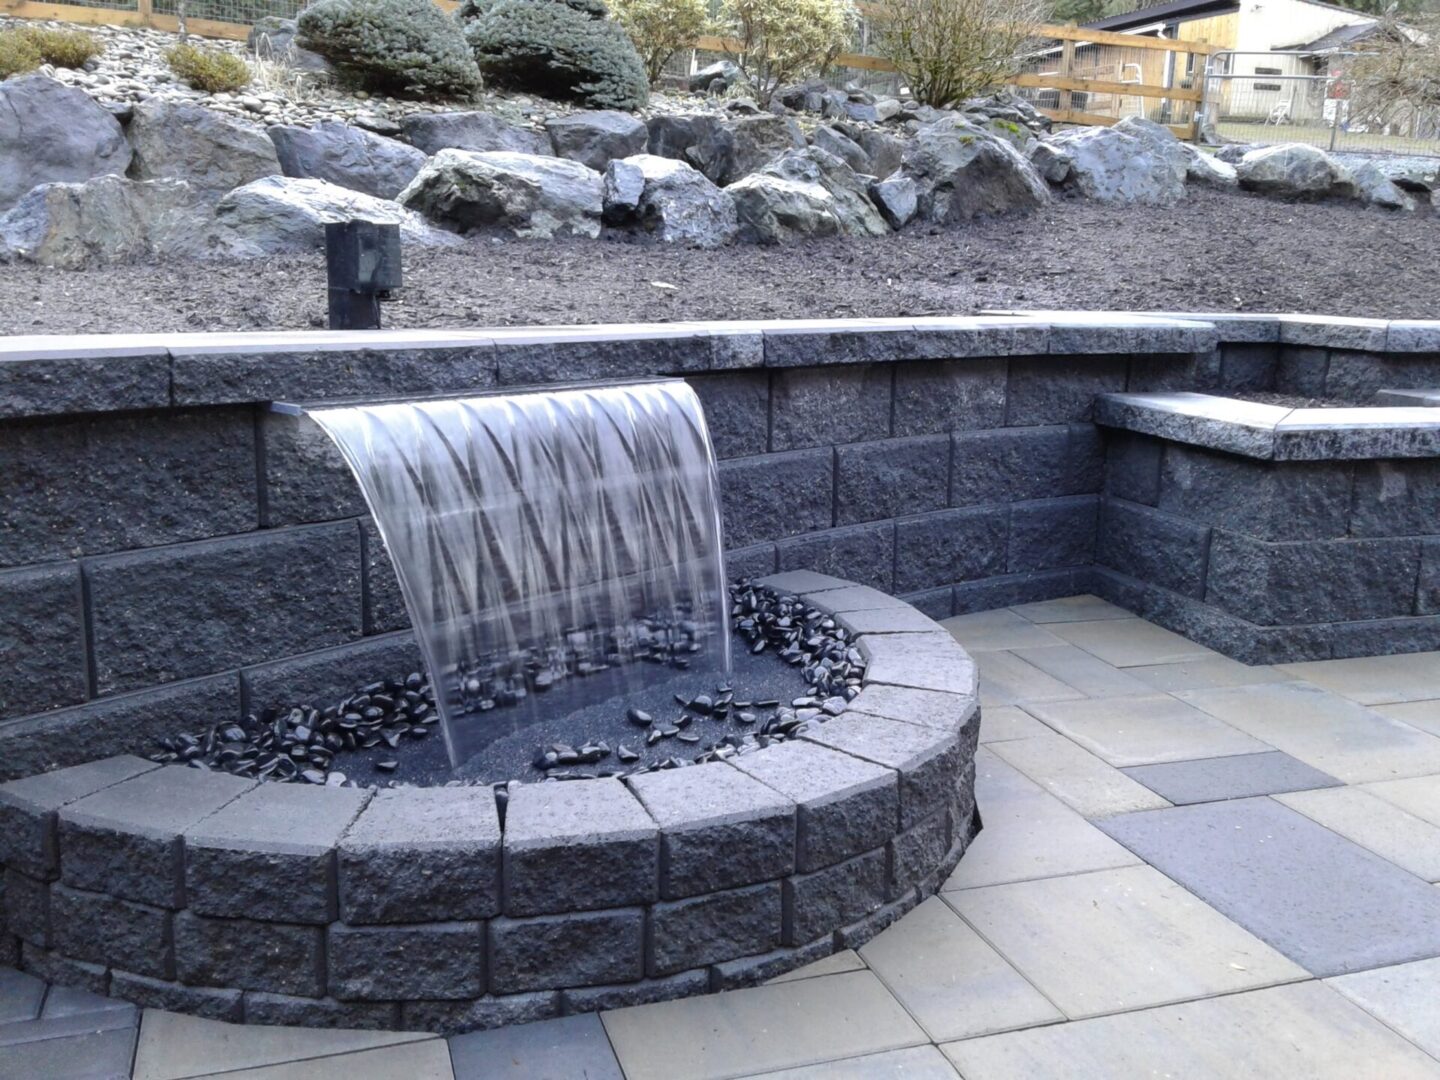 A modern outdoor water feature with water spilling from a metal chute into a curved stone basin surrounded by rocks and pebbles.